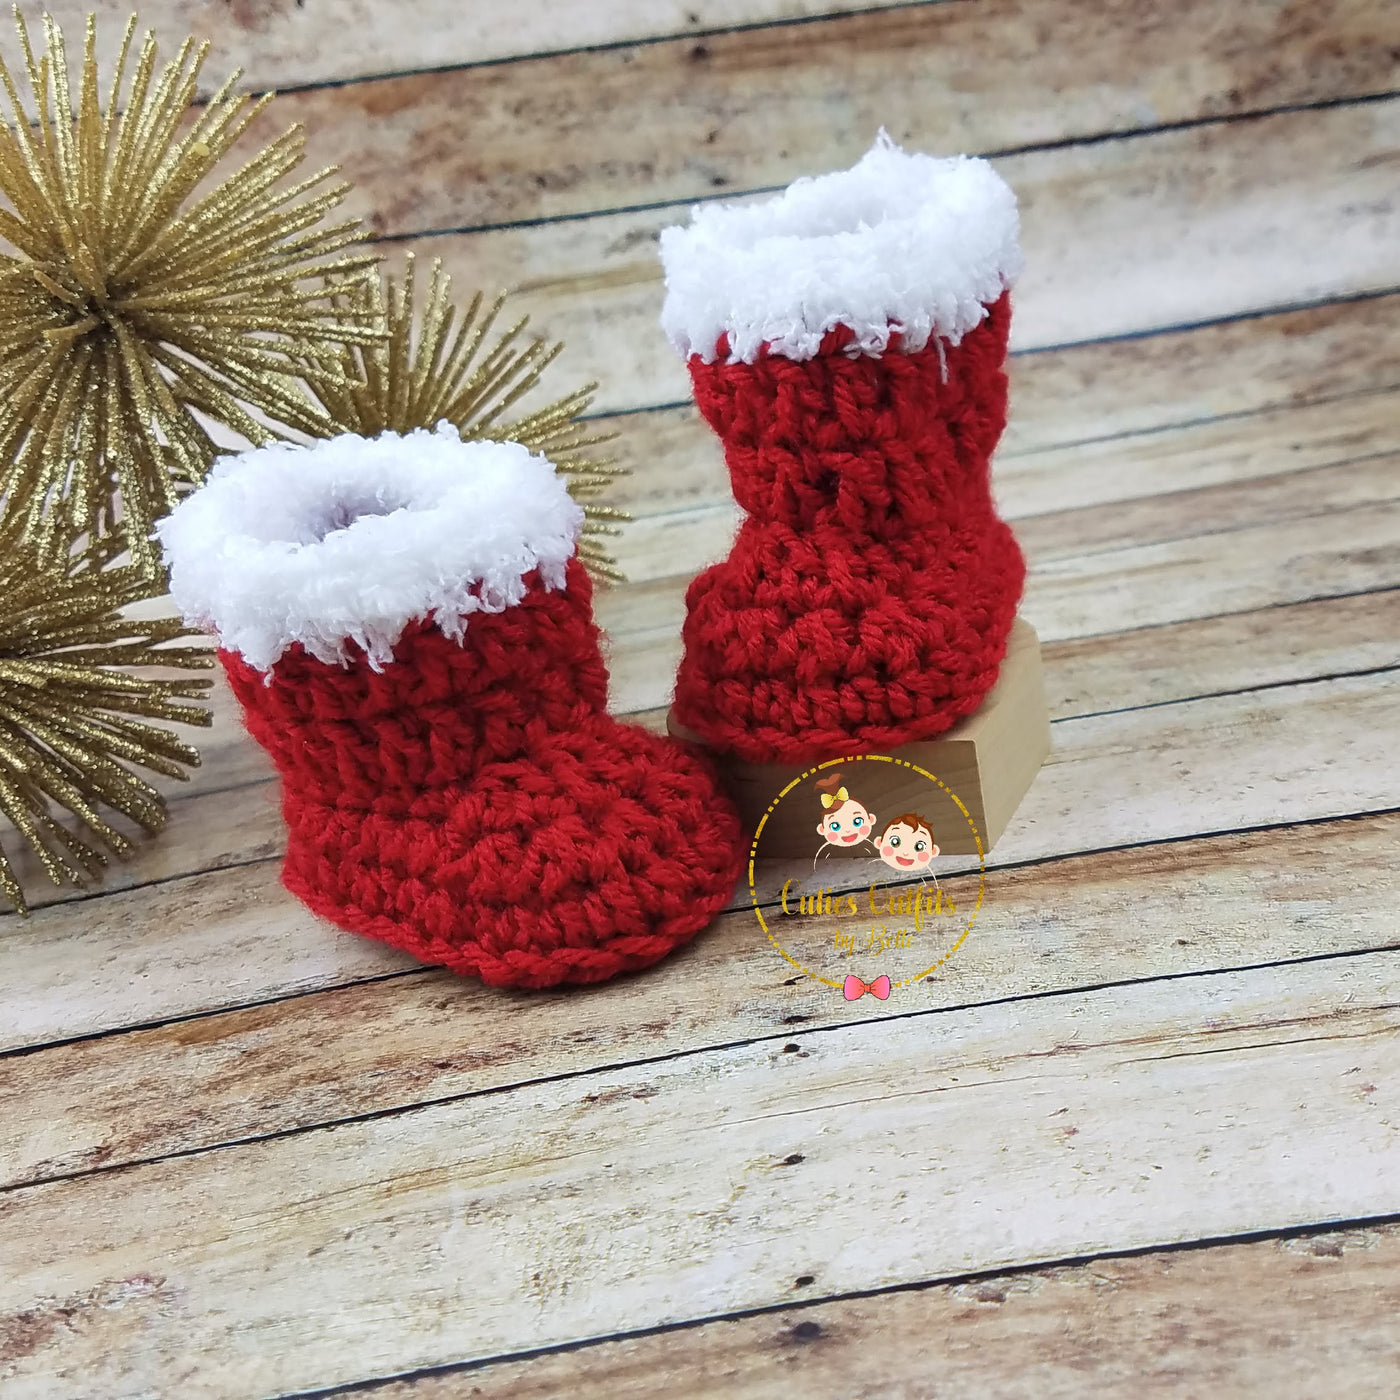 Christmas Baby Outfit, Crochet Baby Skirt, Newborn Santa Outfit